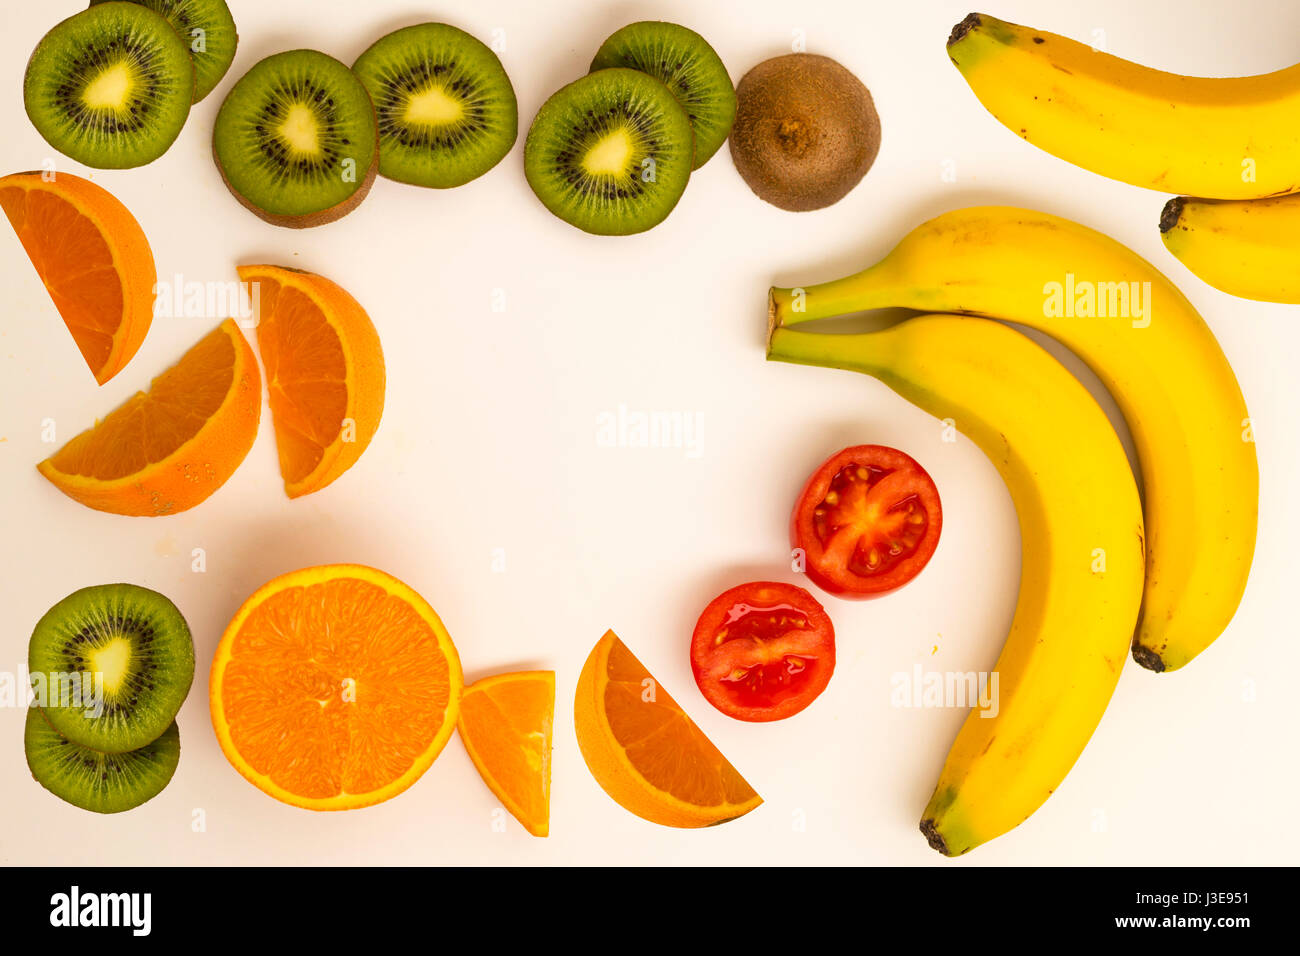 Fruits with vitamin C white background isolated Stock Photo